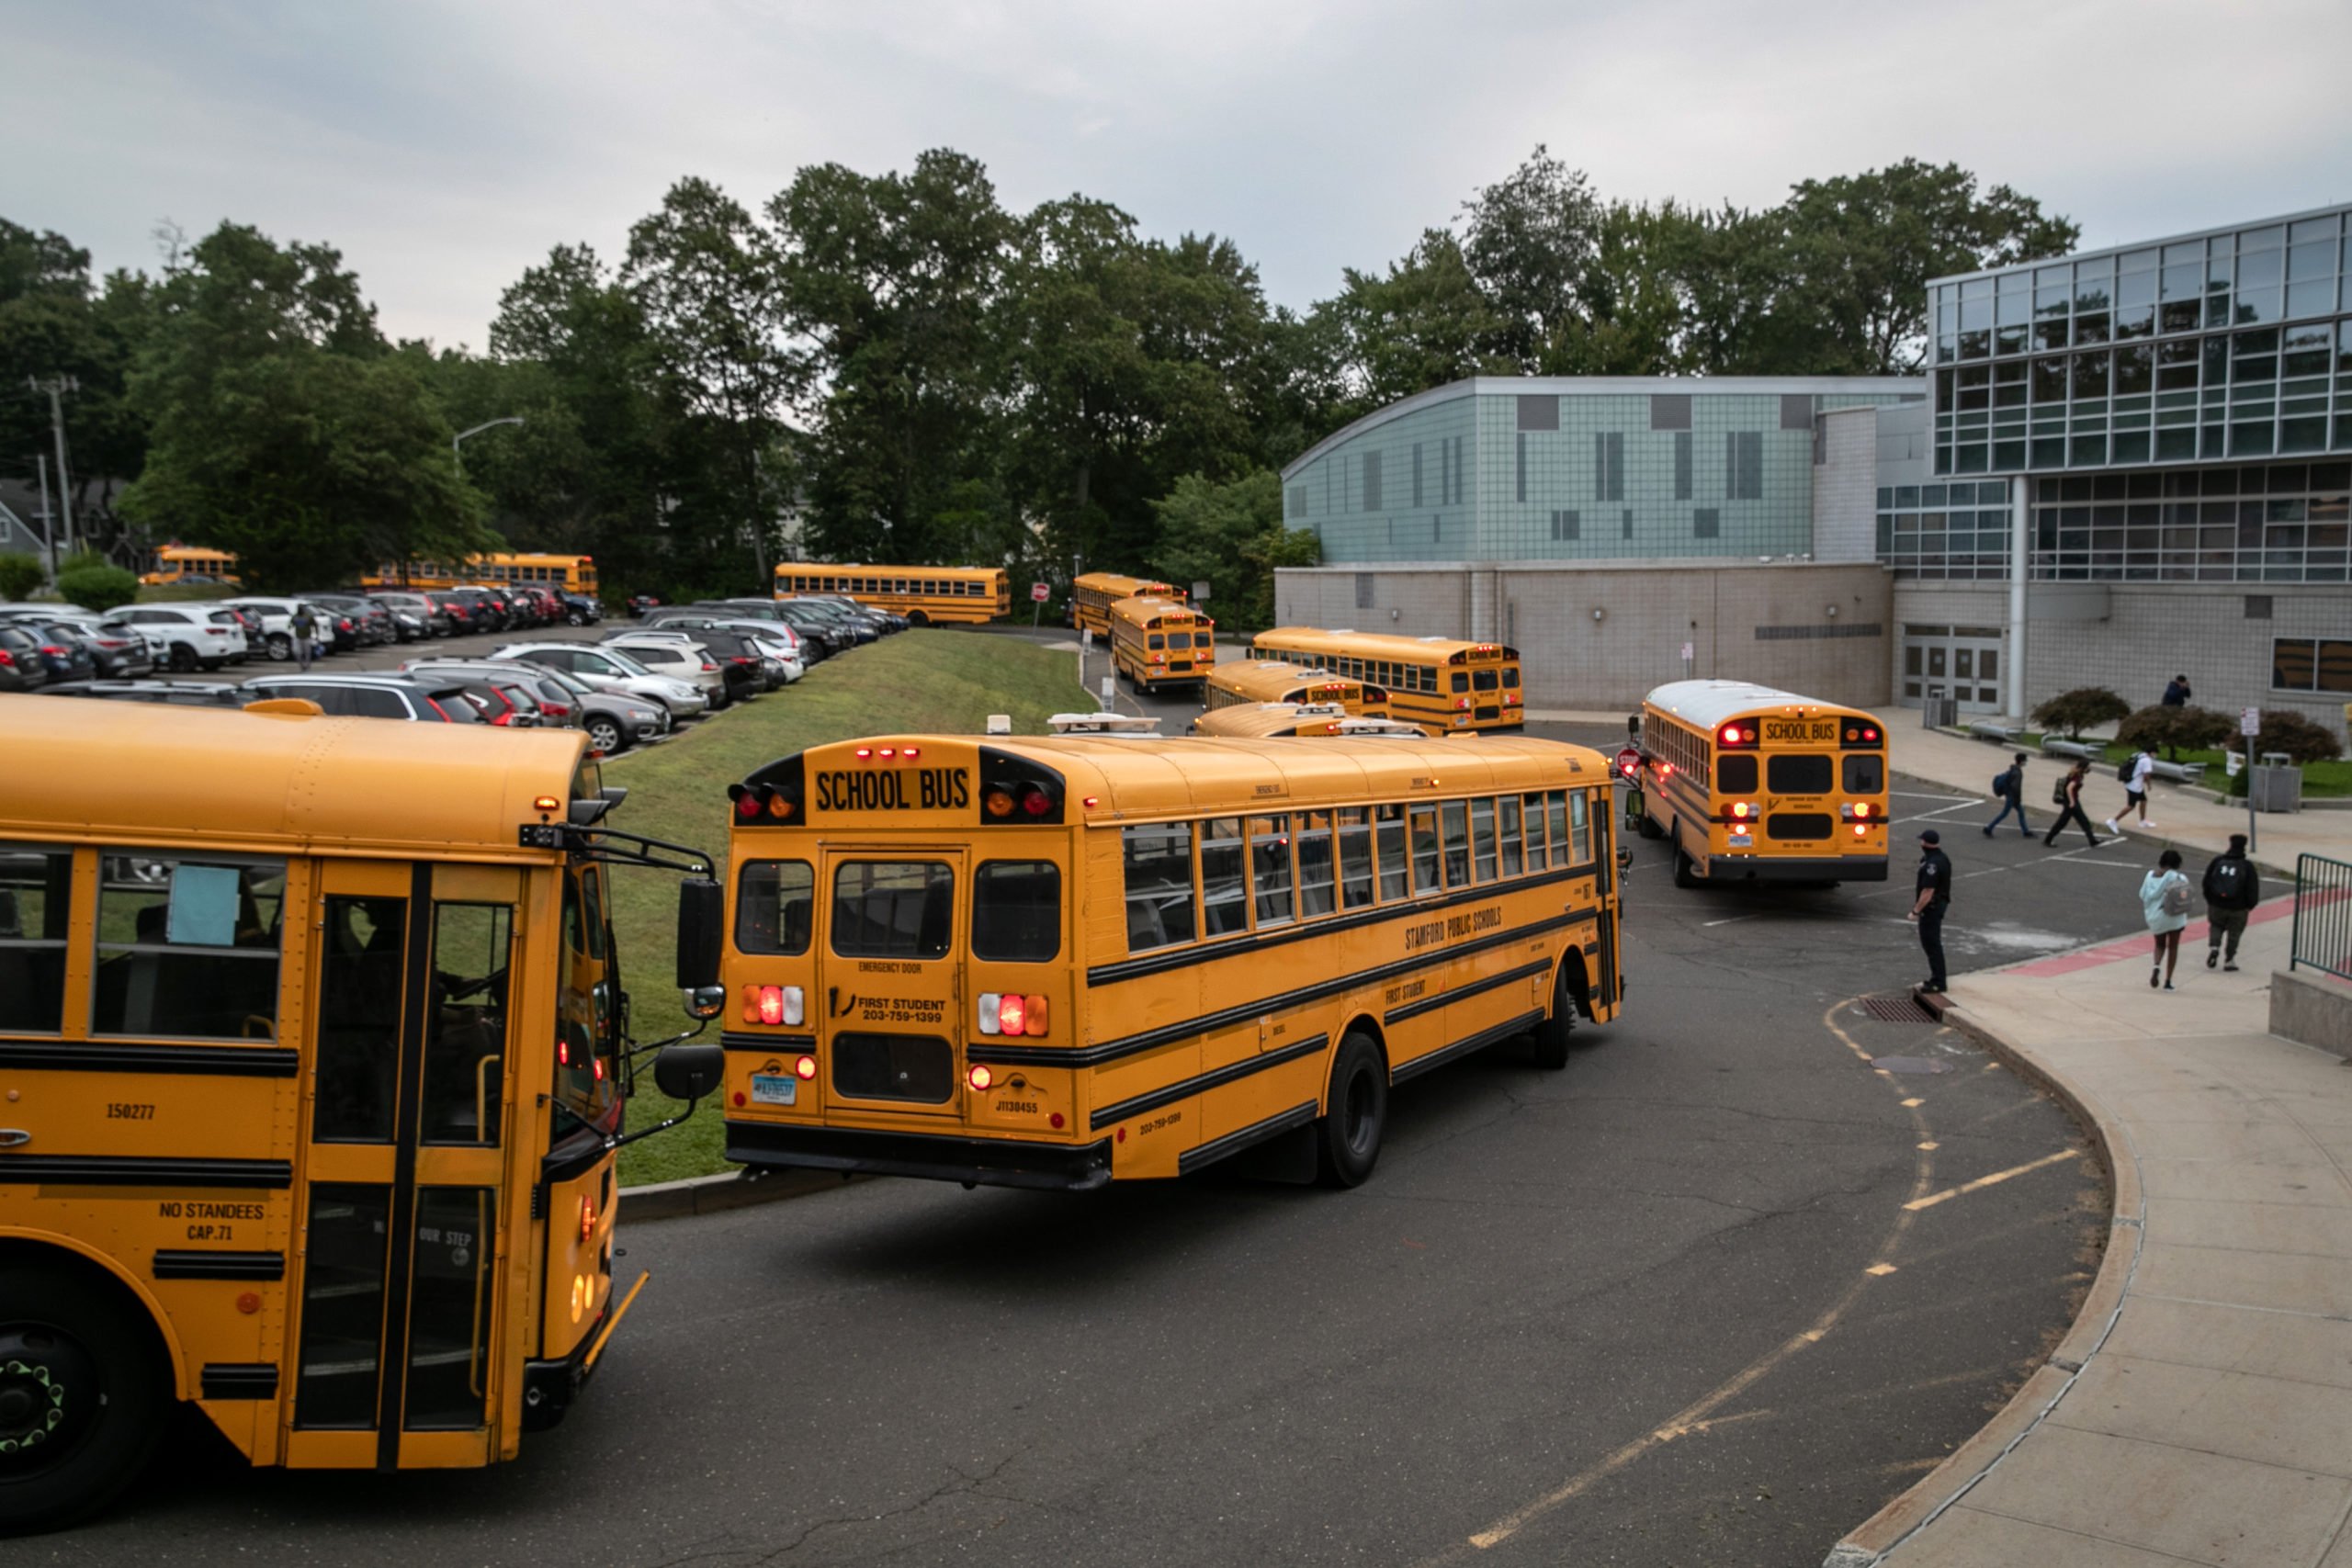 Busses drop-off students at Rippowam Middle School on September 14, 2020 in Stamford, Connecticut. (John Moore/Getty Images)